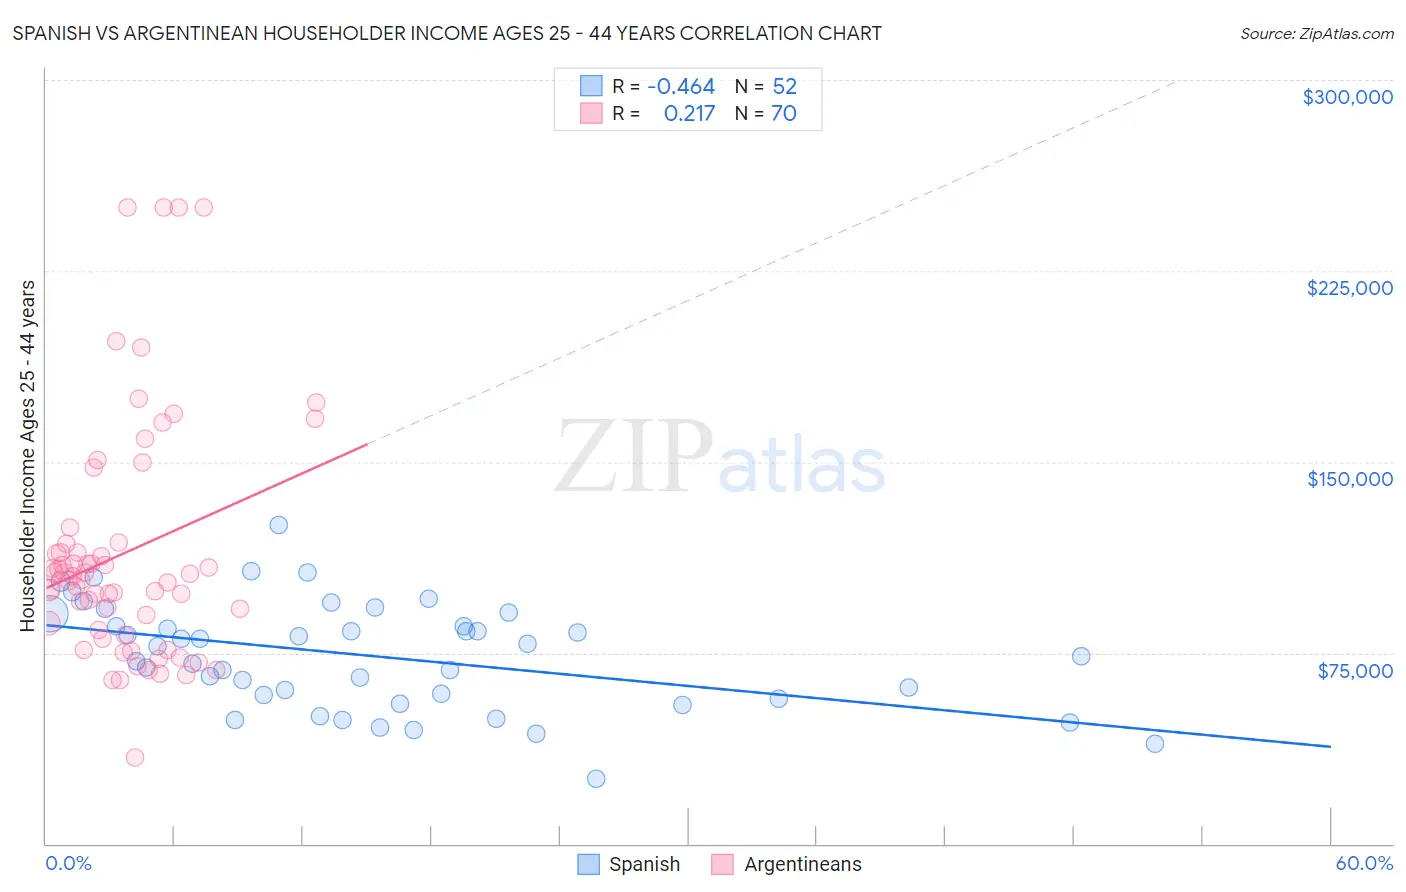 Spanish vs Argentinean Householder Income Ages 25 - 44 years